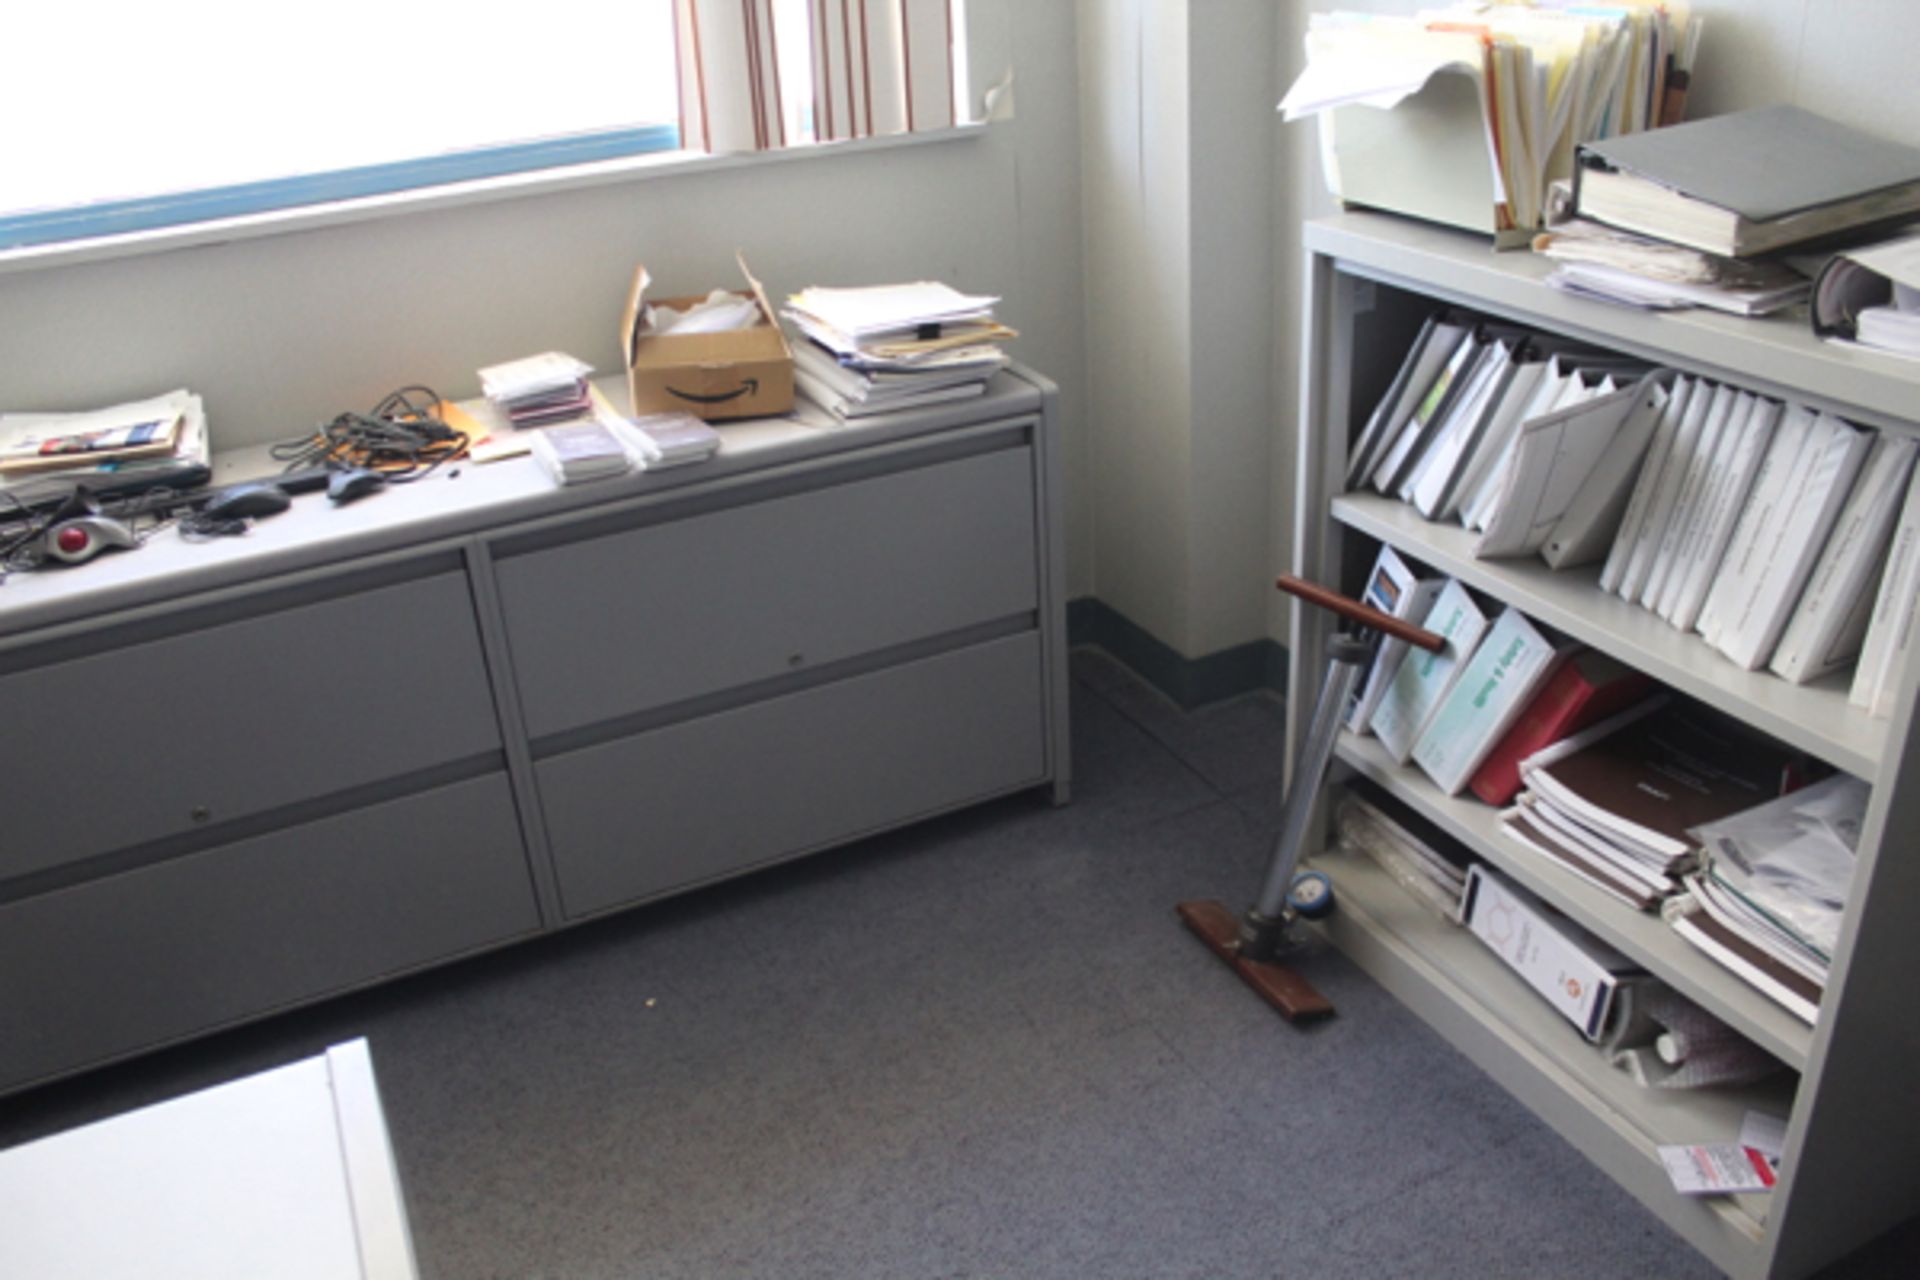 Contents of Office | Location: Administration Building - Image 3 of 3